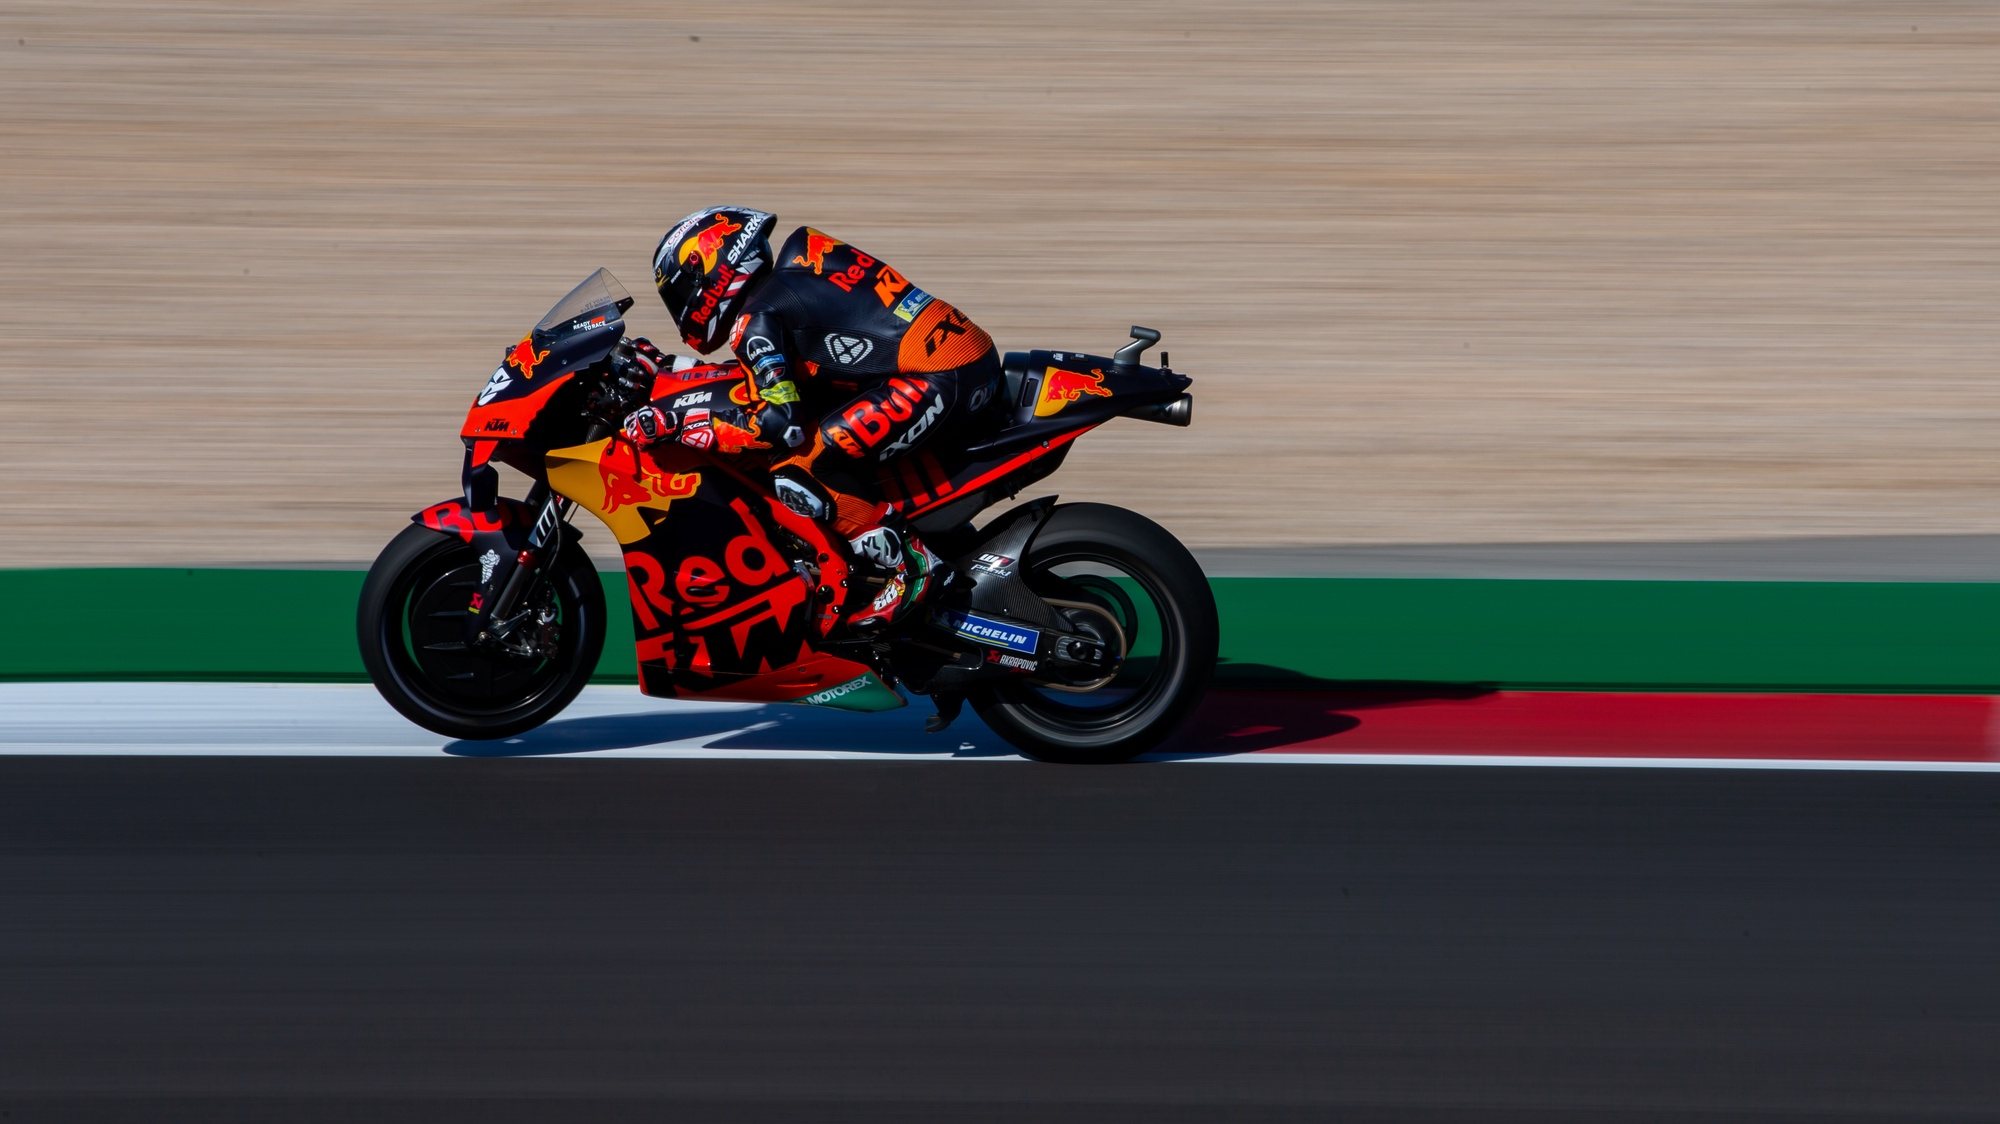 Portuguese rider of Red Bull KTM Factory Racing team, Miguel Oliveira, in action during the warm up session for the Grand Prix of Portugal at Algarve International race track, south of Portugal, 18 April 2021. JOSE SENA GOULAO/LUSA